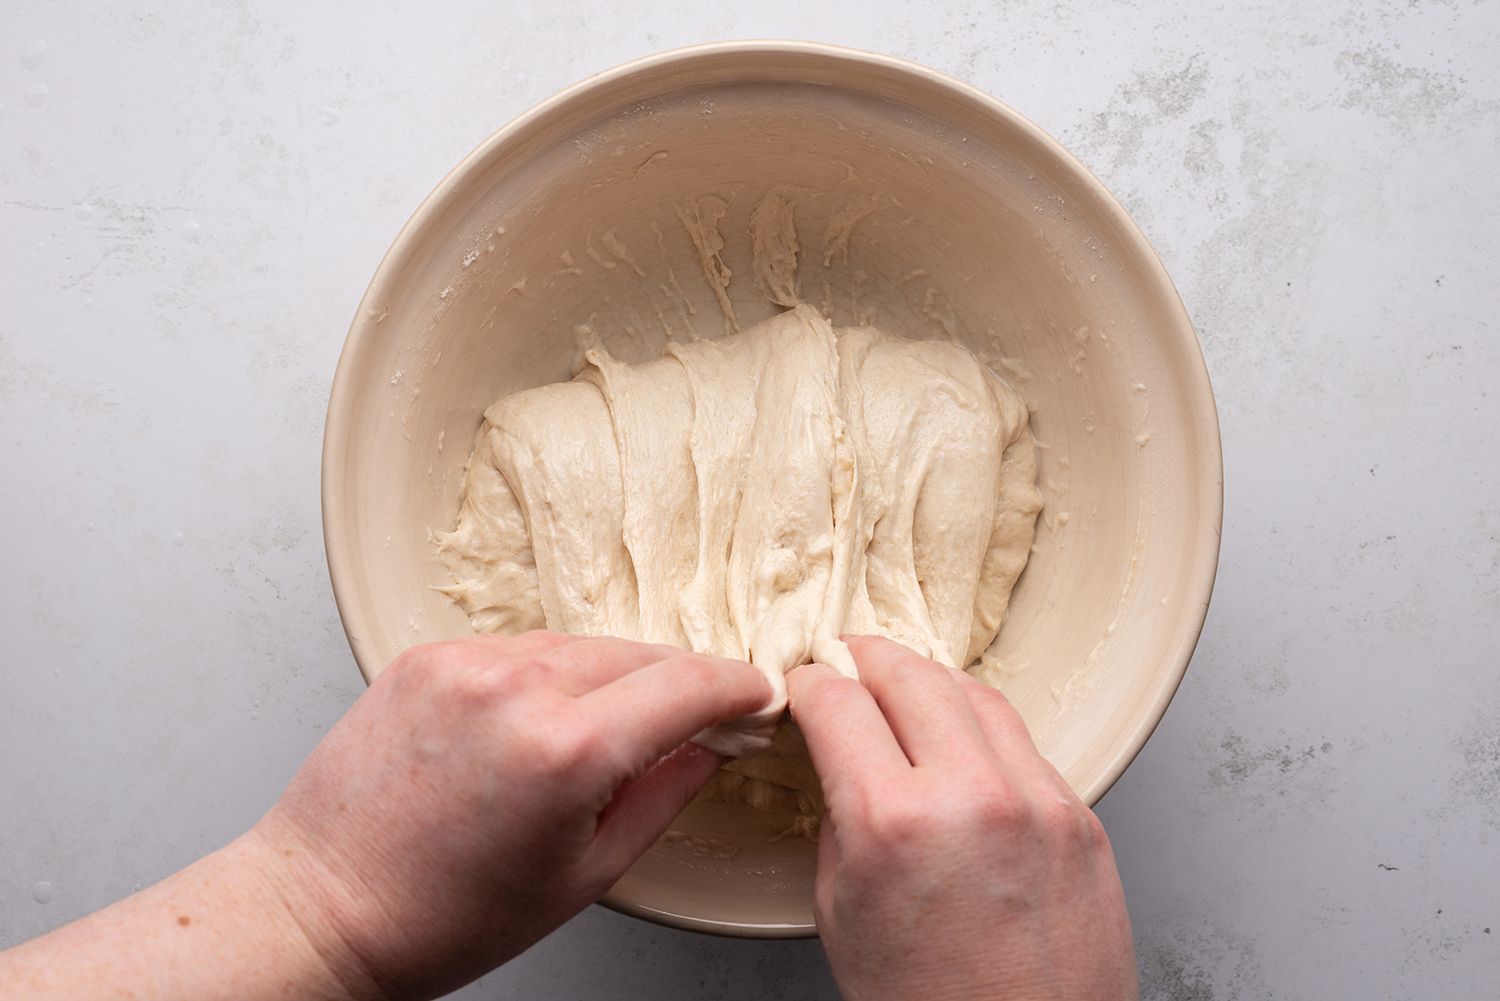 With wet hands, pick up one side of the dough, stretch it, and then fold it over onto the rest